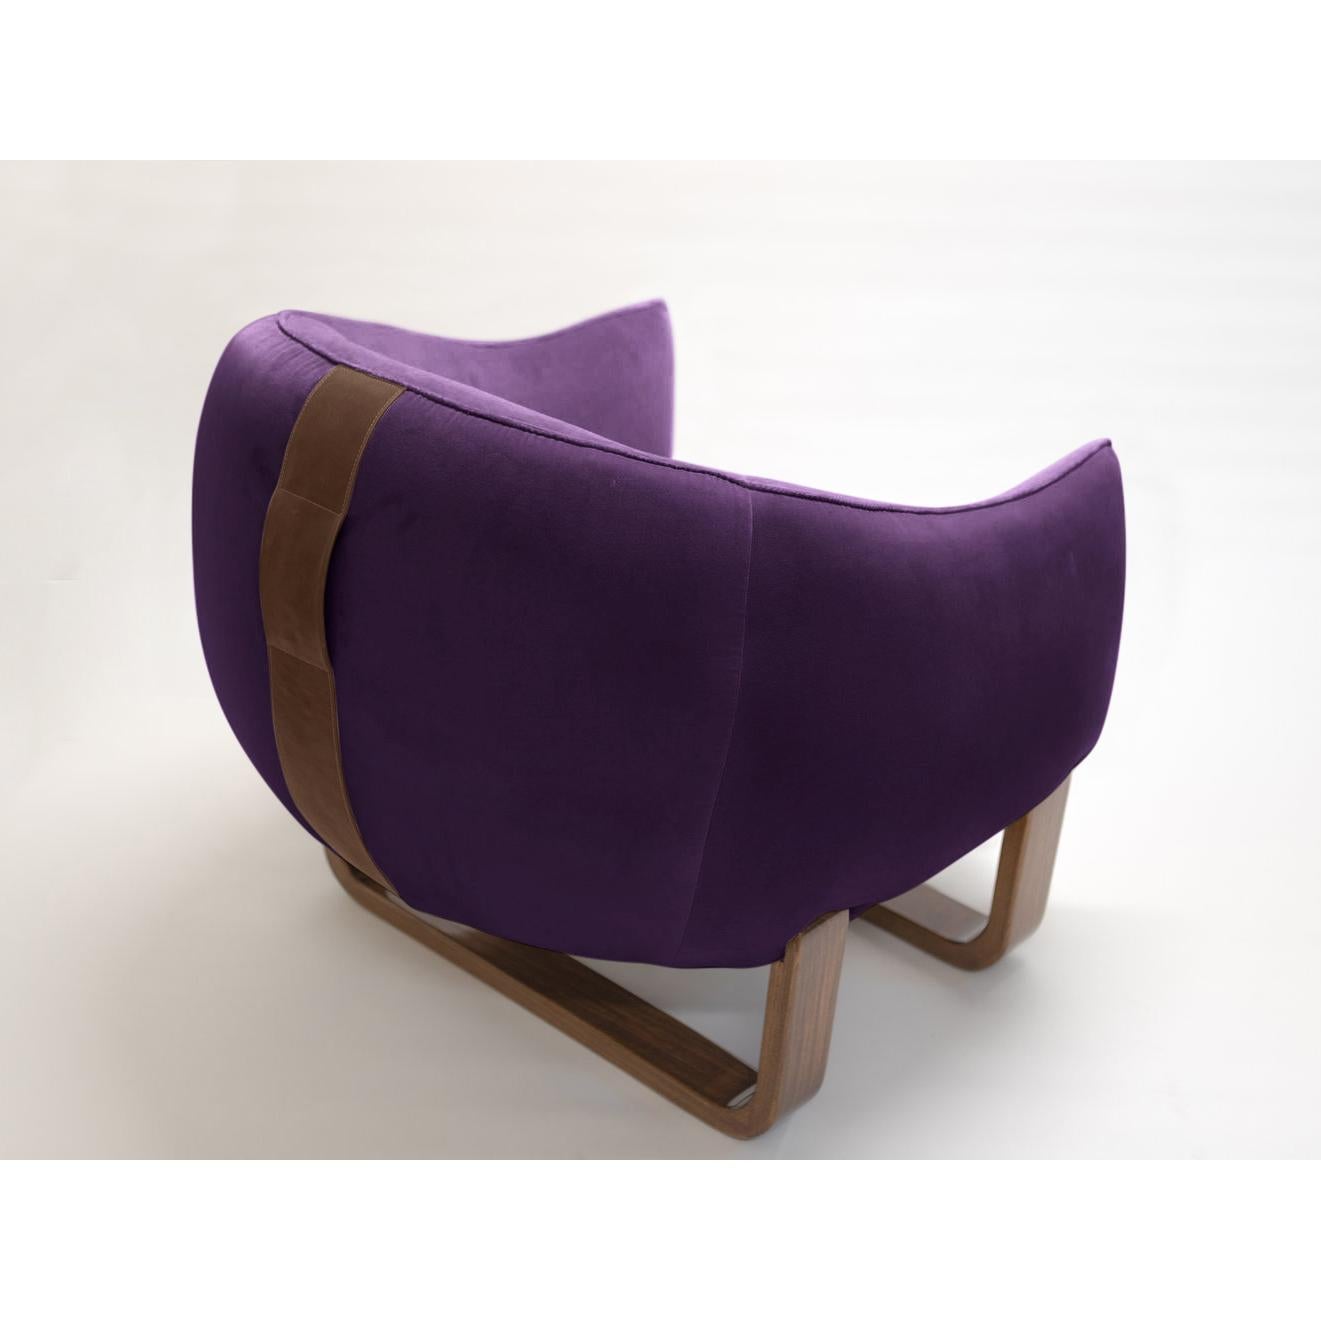 The Milo armchair features twin bentwood bases and legs in luxurious lacquer and varnished finishes, while The Milo Bean has leather accent handles for easy carrying?. The colorful, curvy duo designed by Marie Burgos can be used together with The